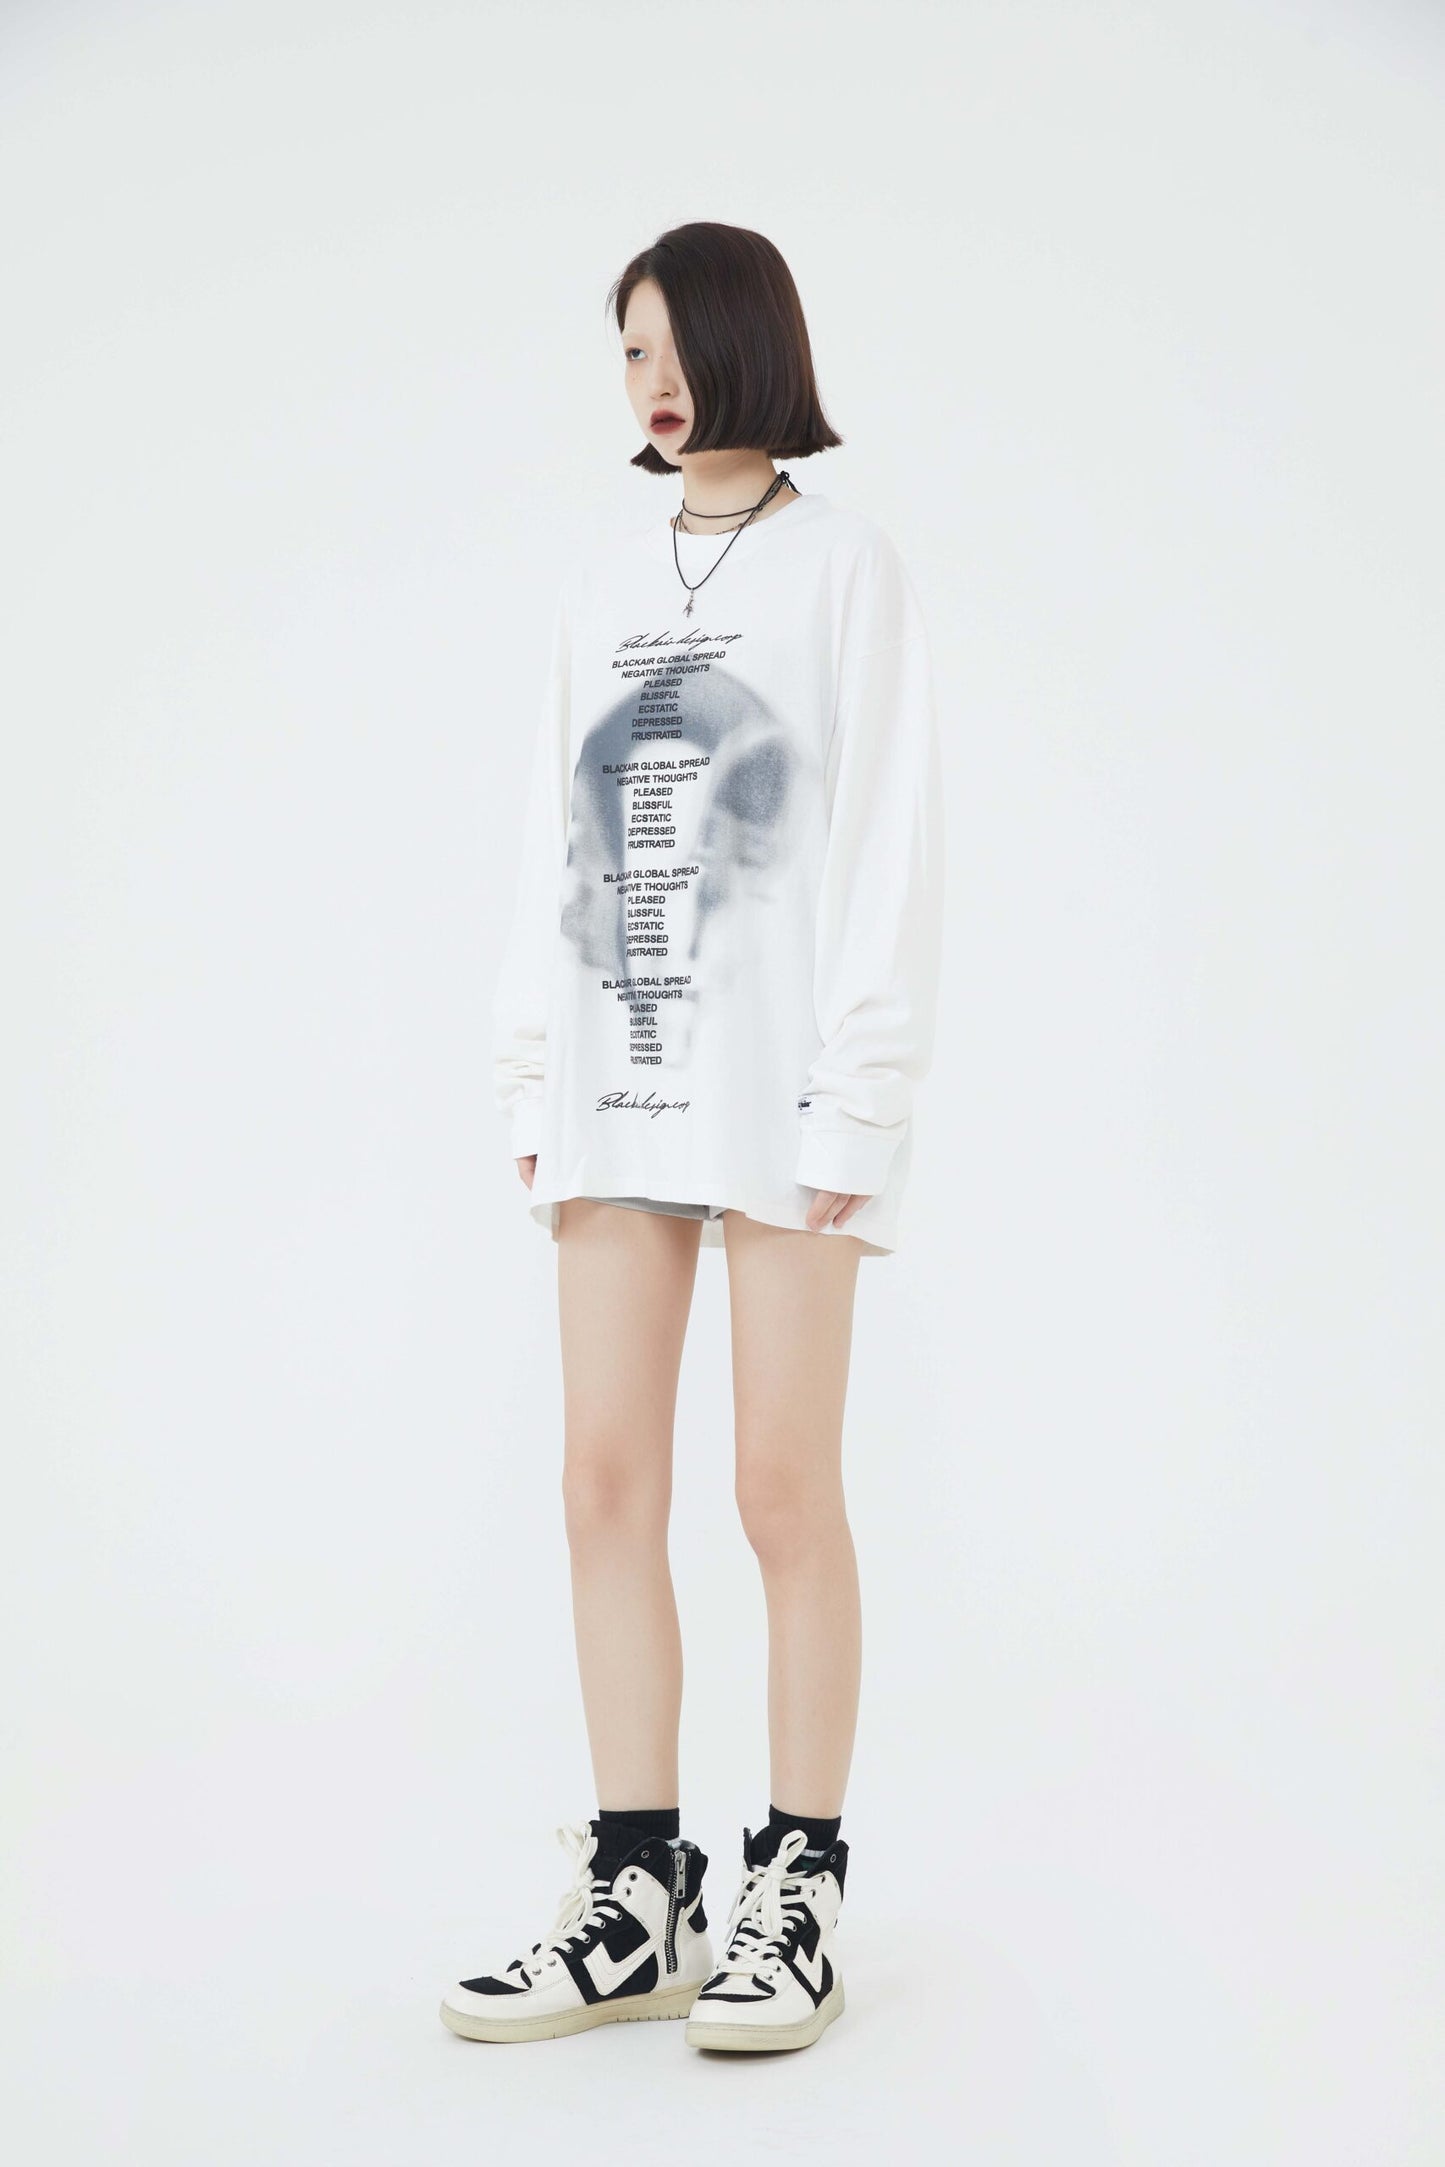 NEGATIVE THOUGHTS LONG-SLEEVE